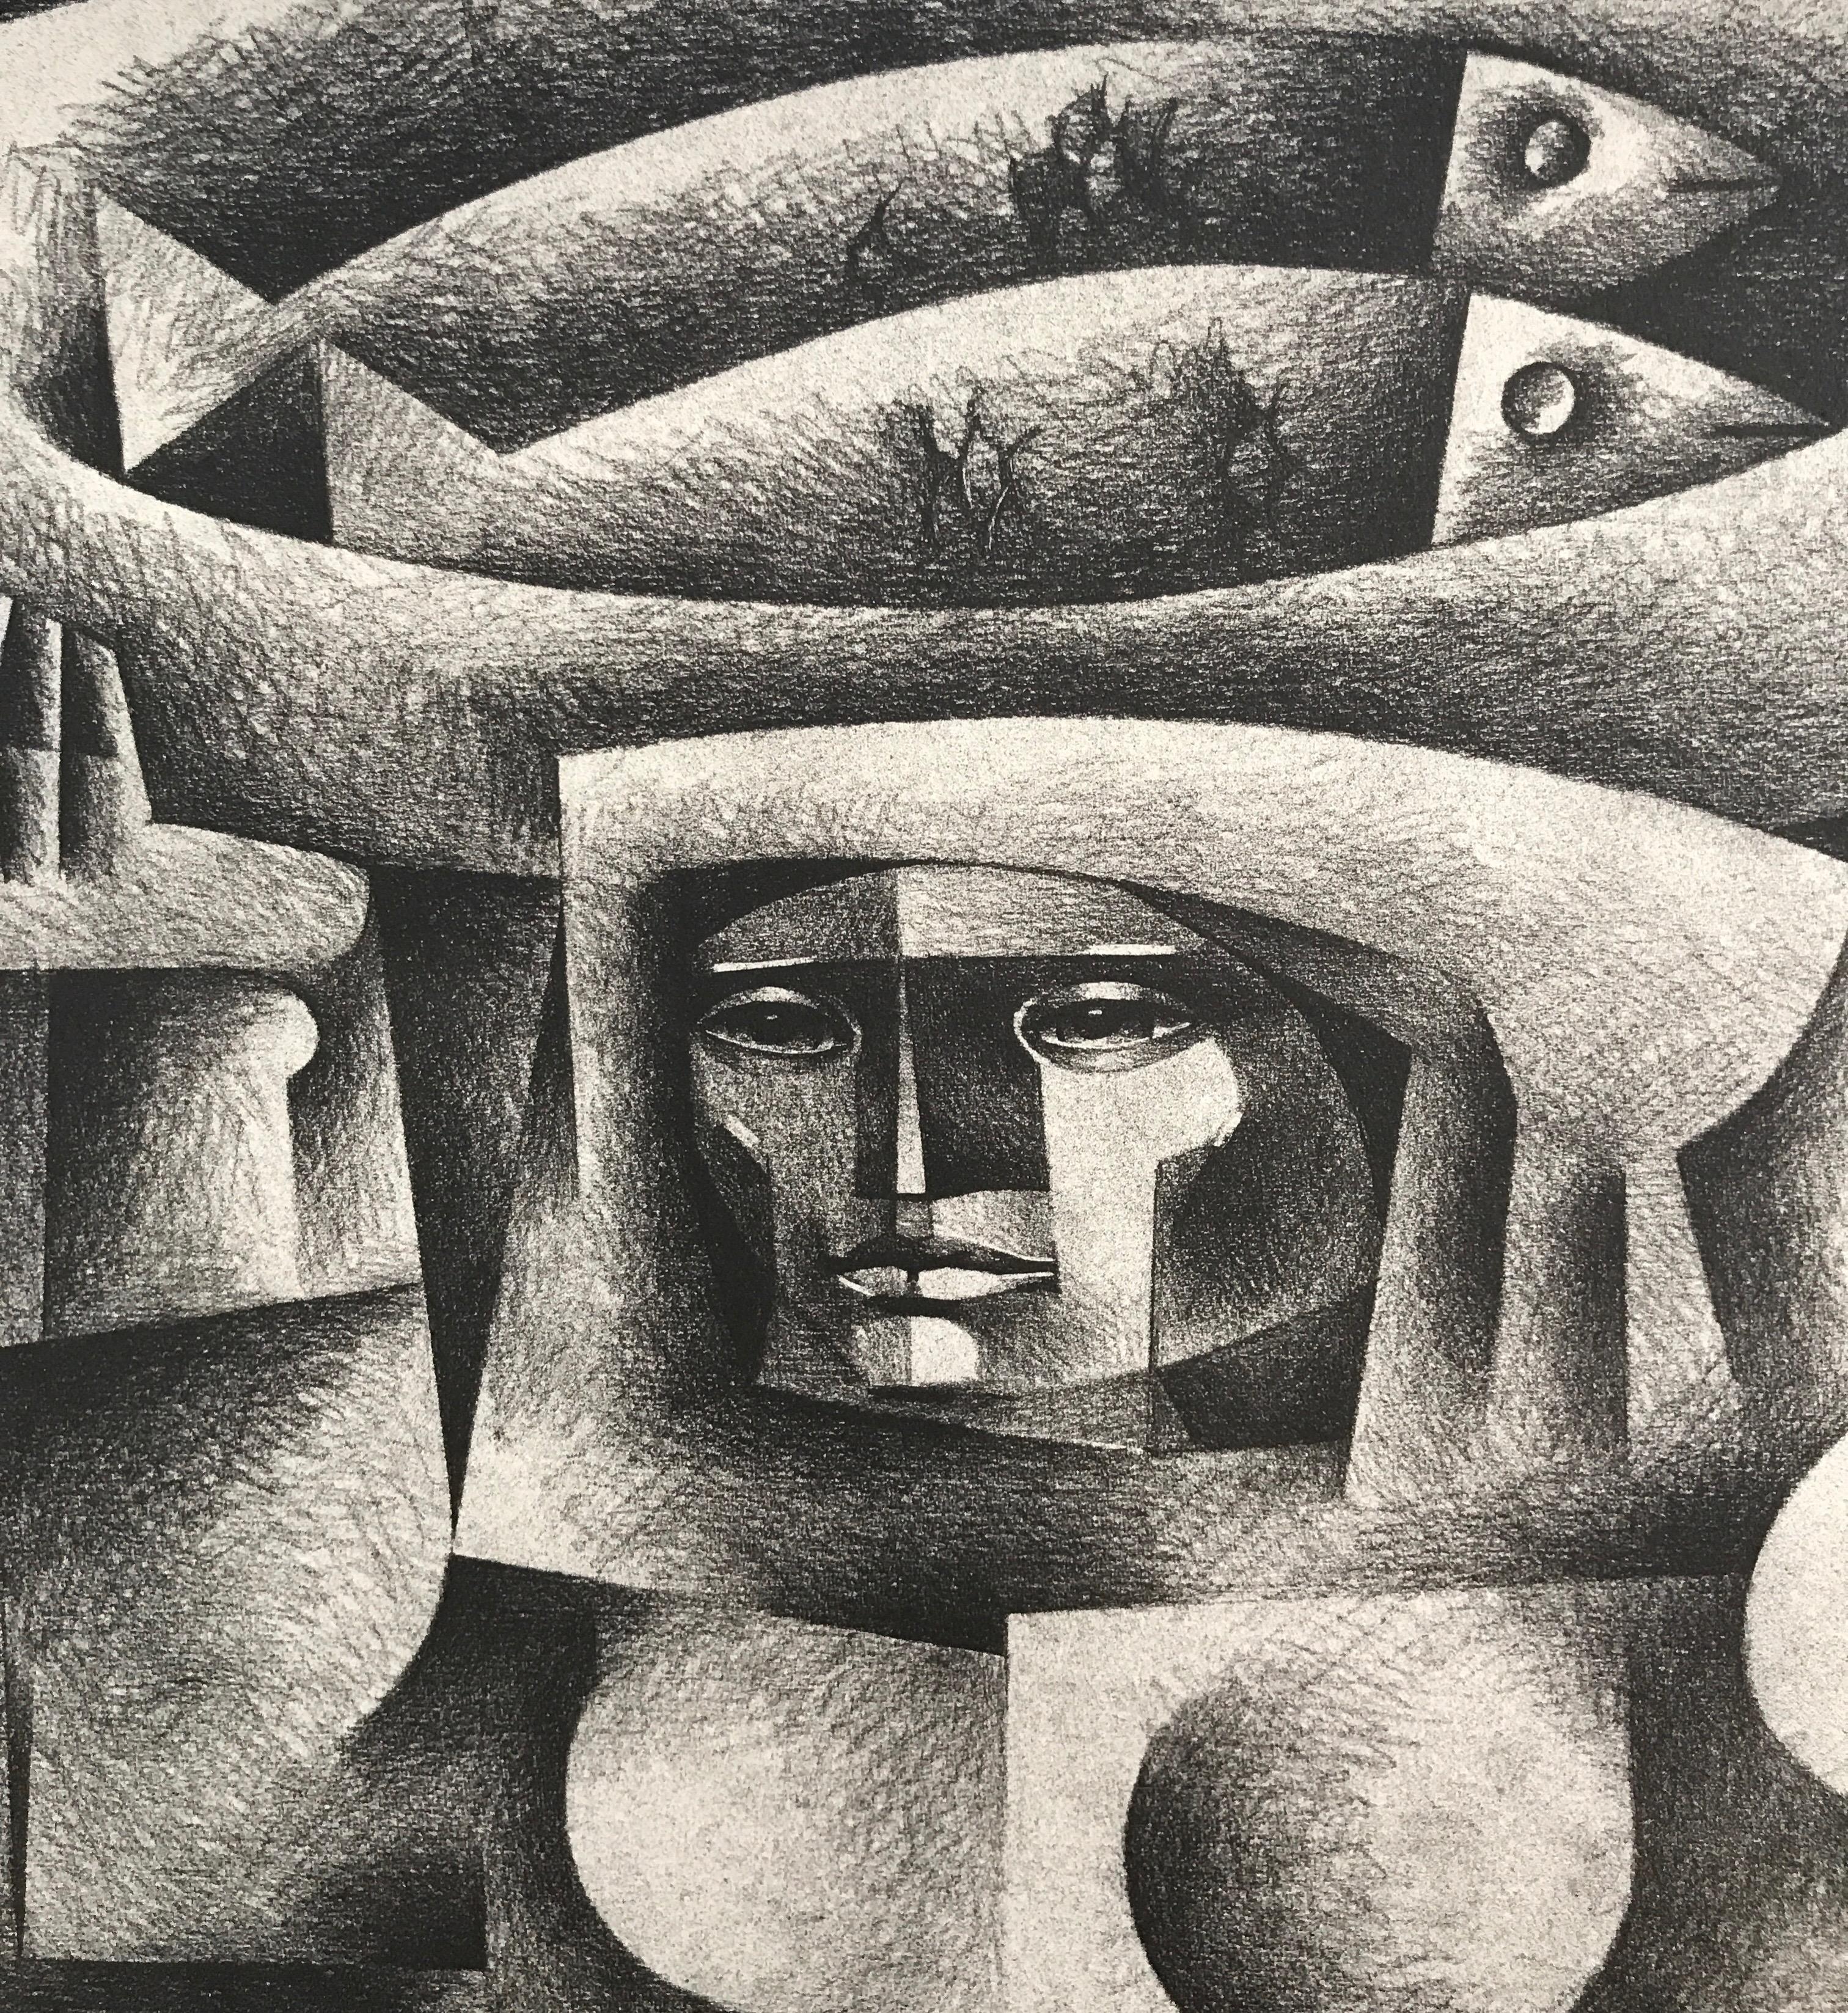 Woman Carrying Fish, Signed Lithograph, Cubist Style Female Portrait Fish - Print by Jorge Dumas